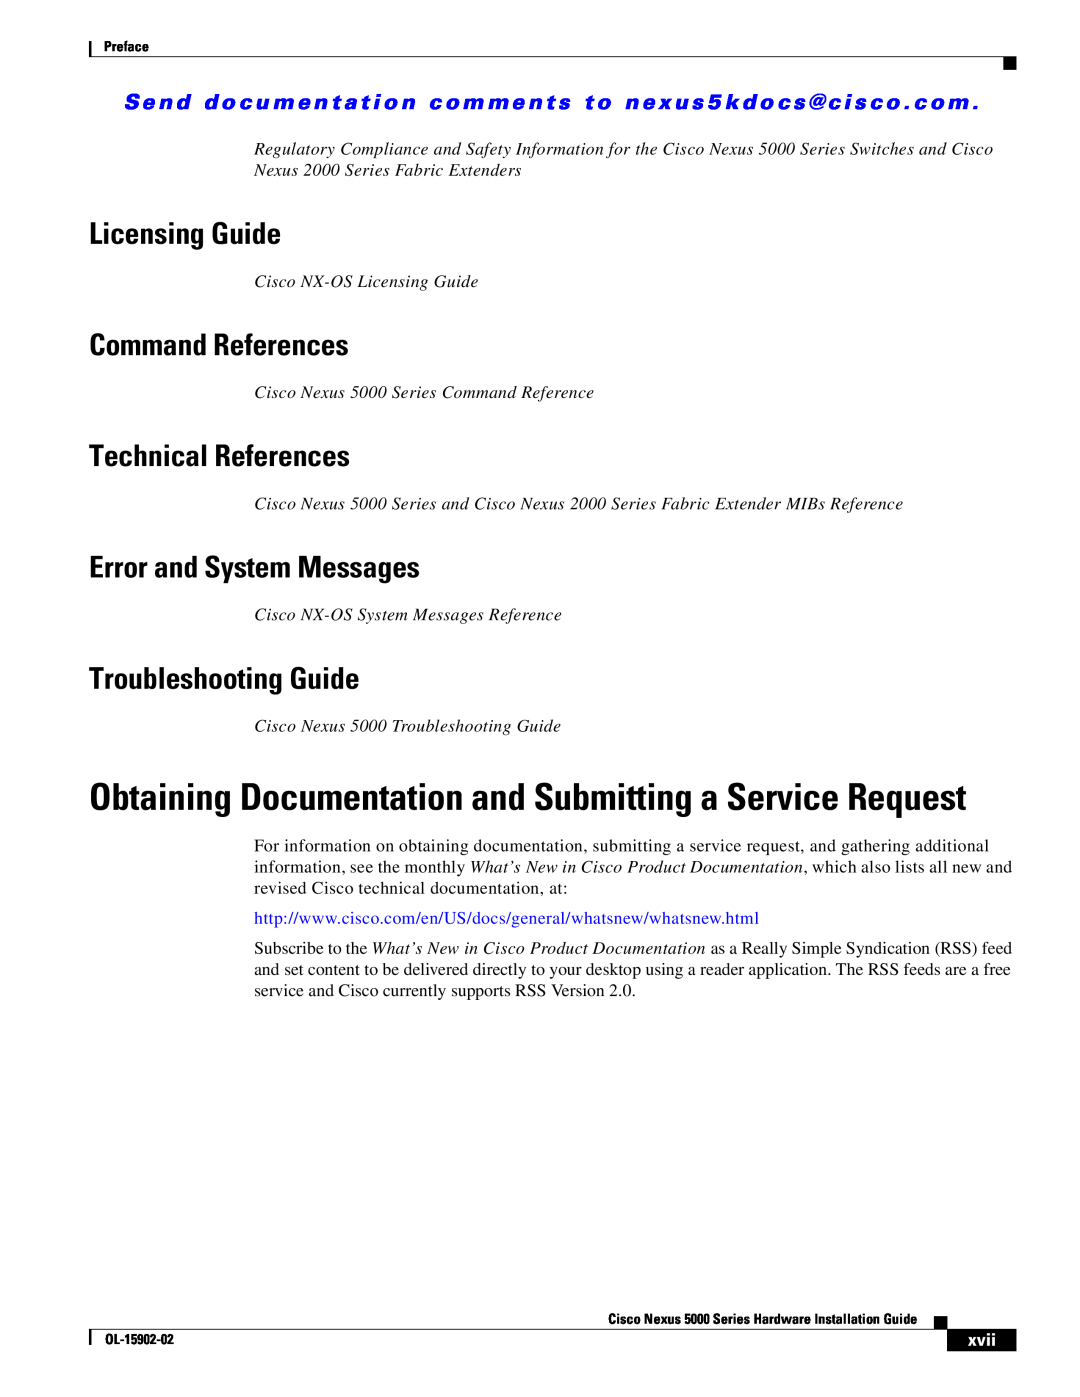 Cisco Systems 5000 Obtaining Documentation and Submitting a Service Request, Licensing Guide, Command References, xvii 